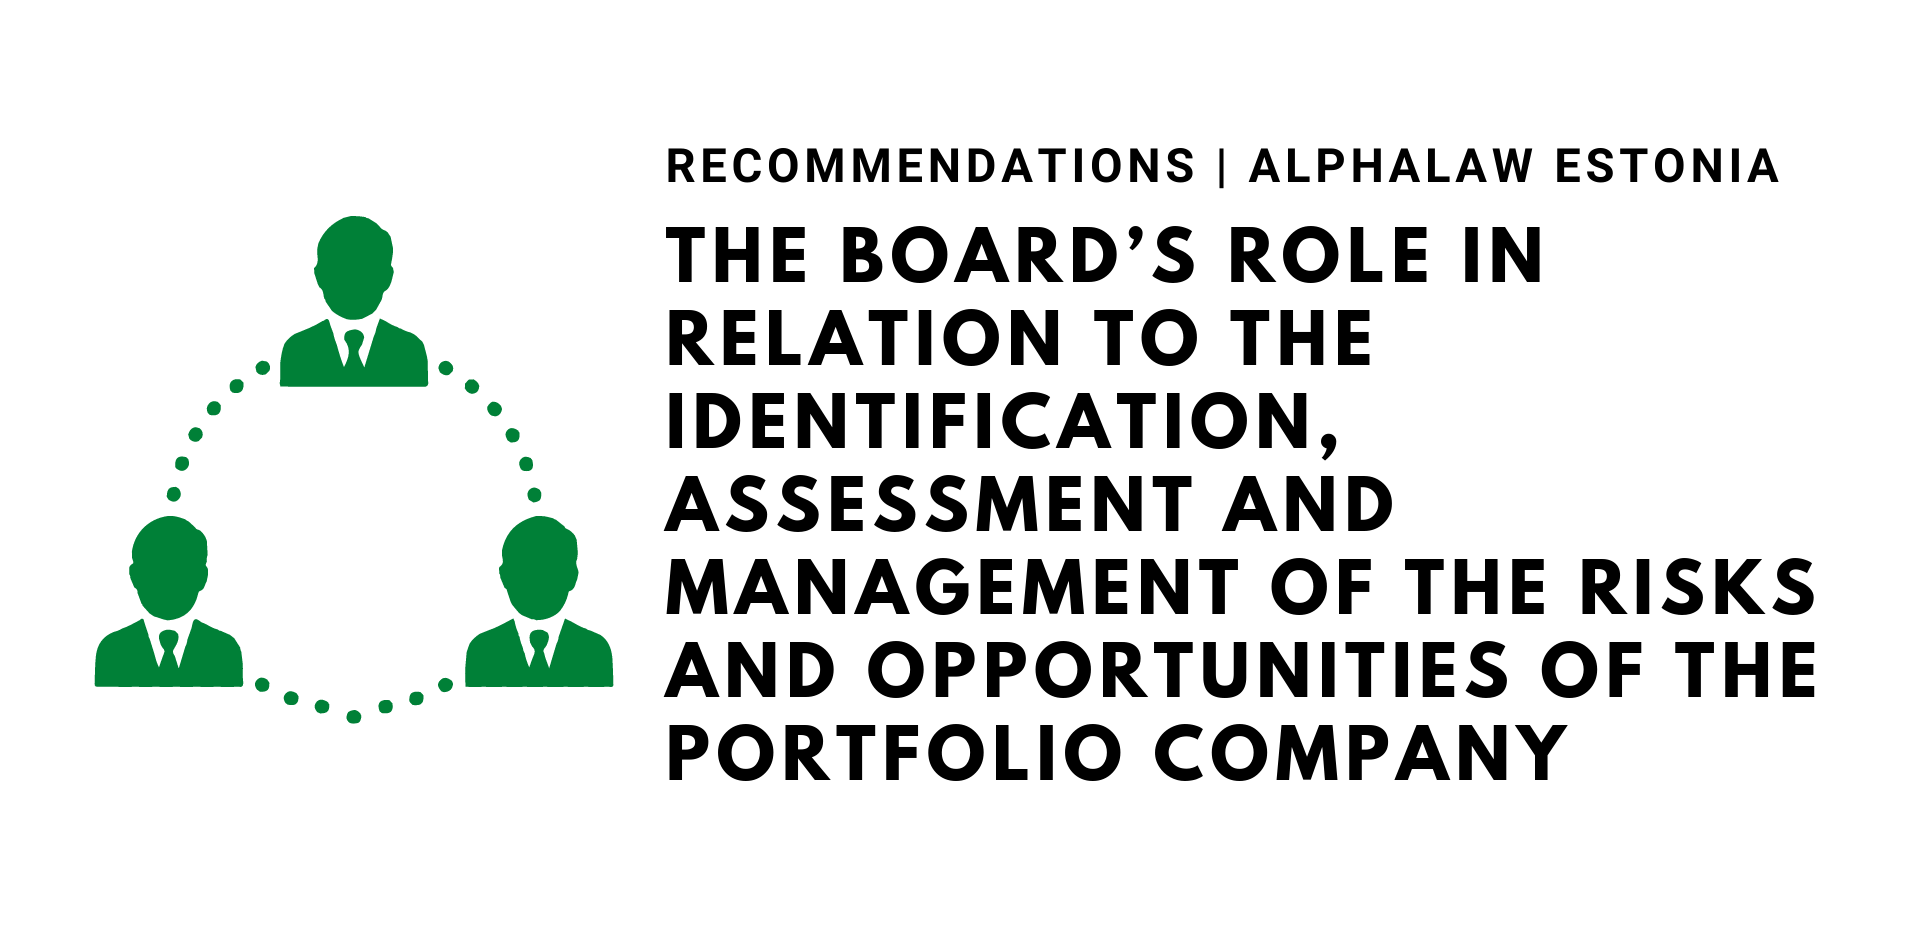 The Board’s Role in Relation to the Identification, Assessment and Management of the Risks and Opportunities of the Portfolio Company